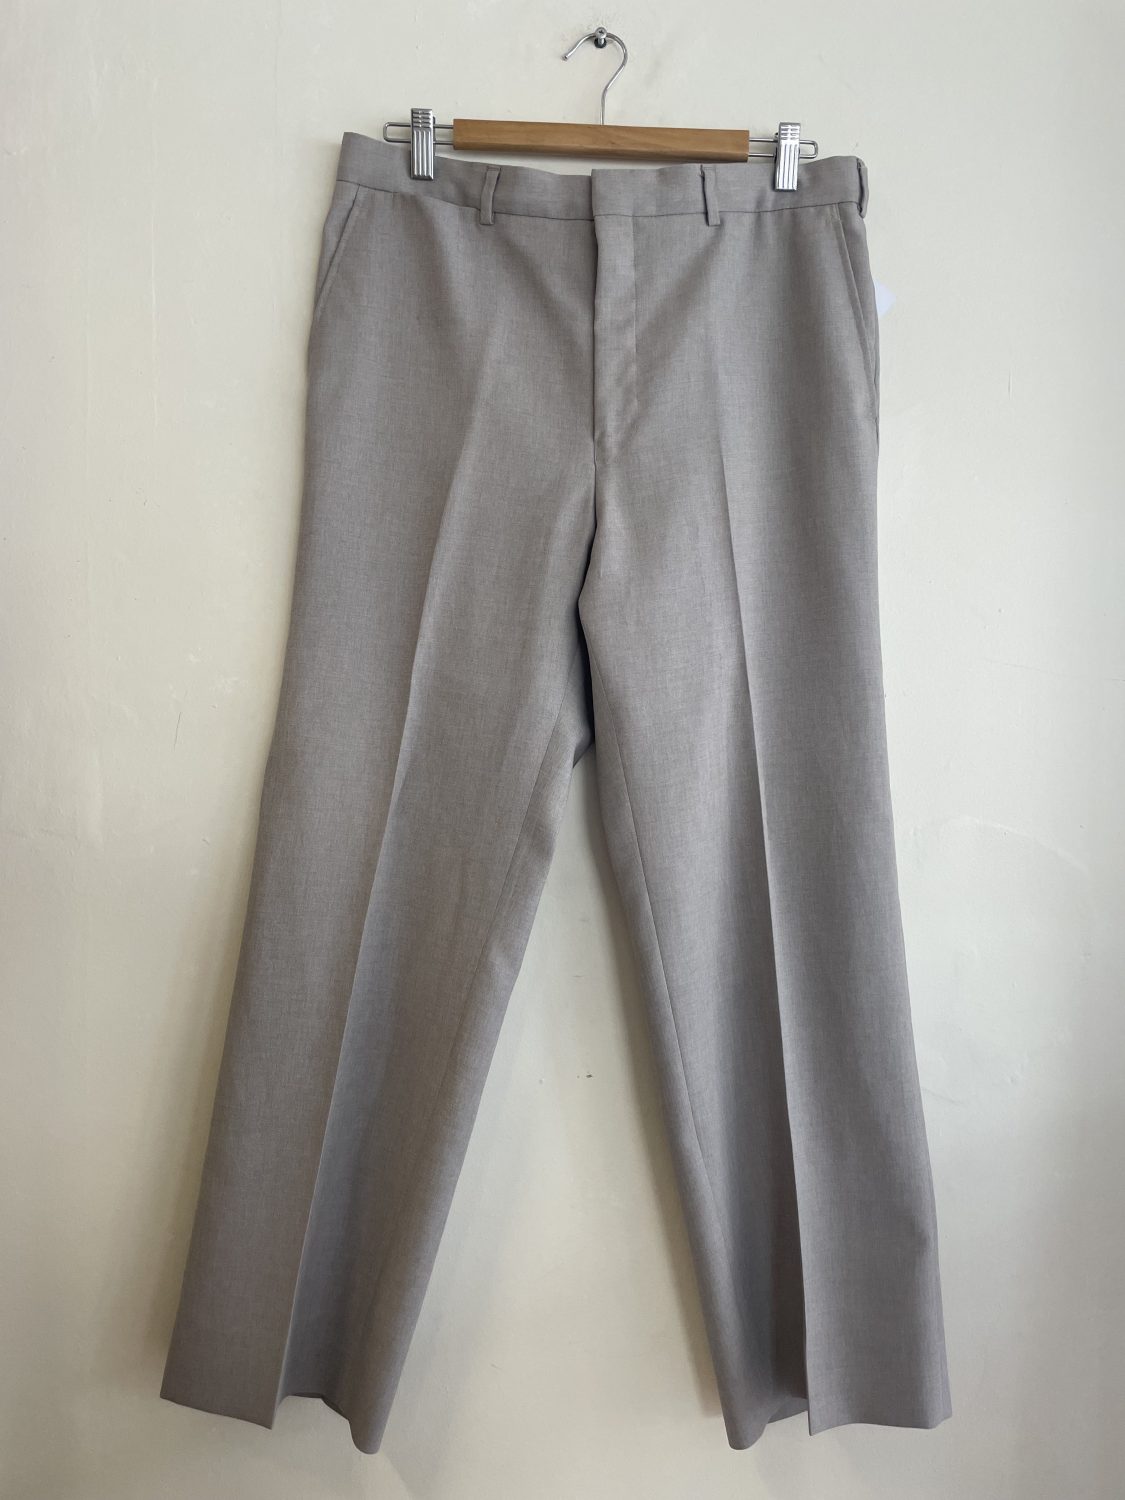 AUTHENTIC 70's 'MCGREGOR' SMOKEY TAUPE SAFARI SUIT 34inch pants | Chaos ...